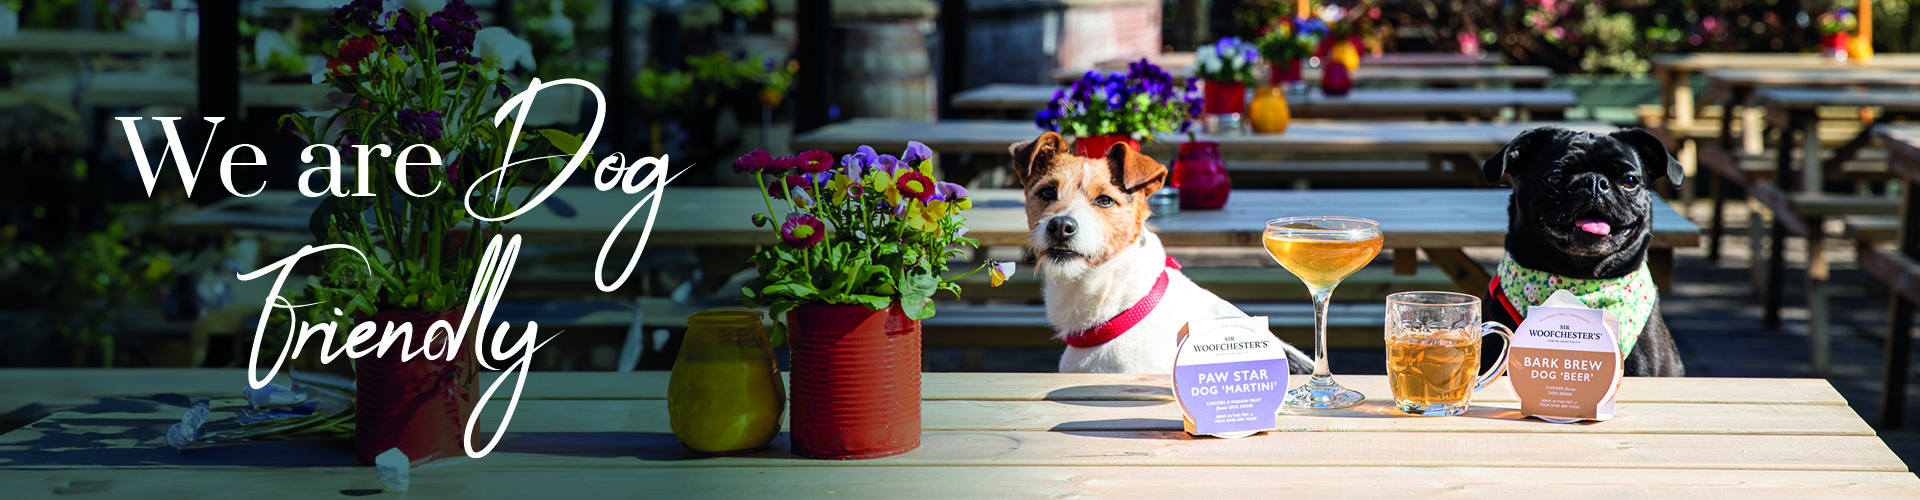 We are Dog Friendly at Ferryboat Inn